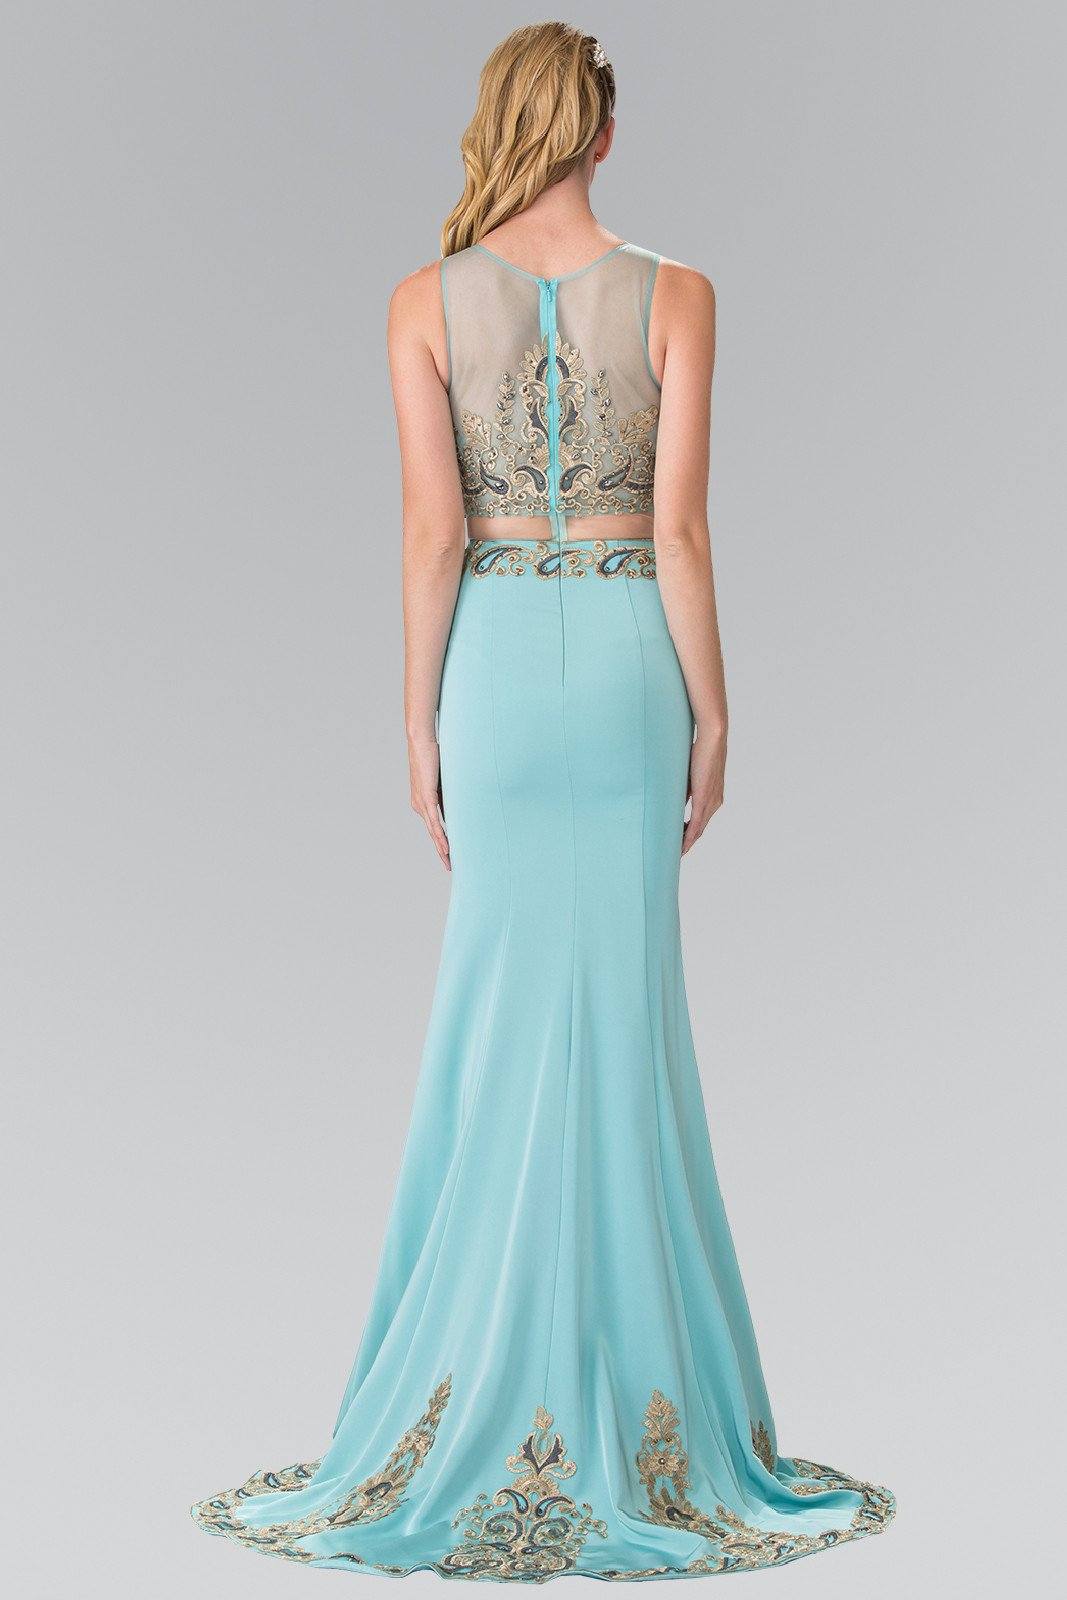 Mock Two-Piece Embroidered Illusion Dress by Elizabeth K GL2248-Long Formal Dresses-ABC Fashion